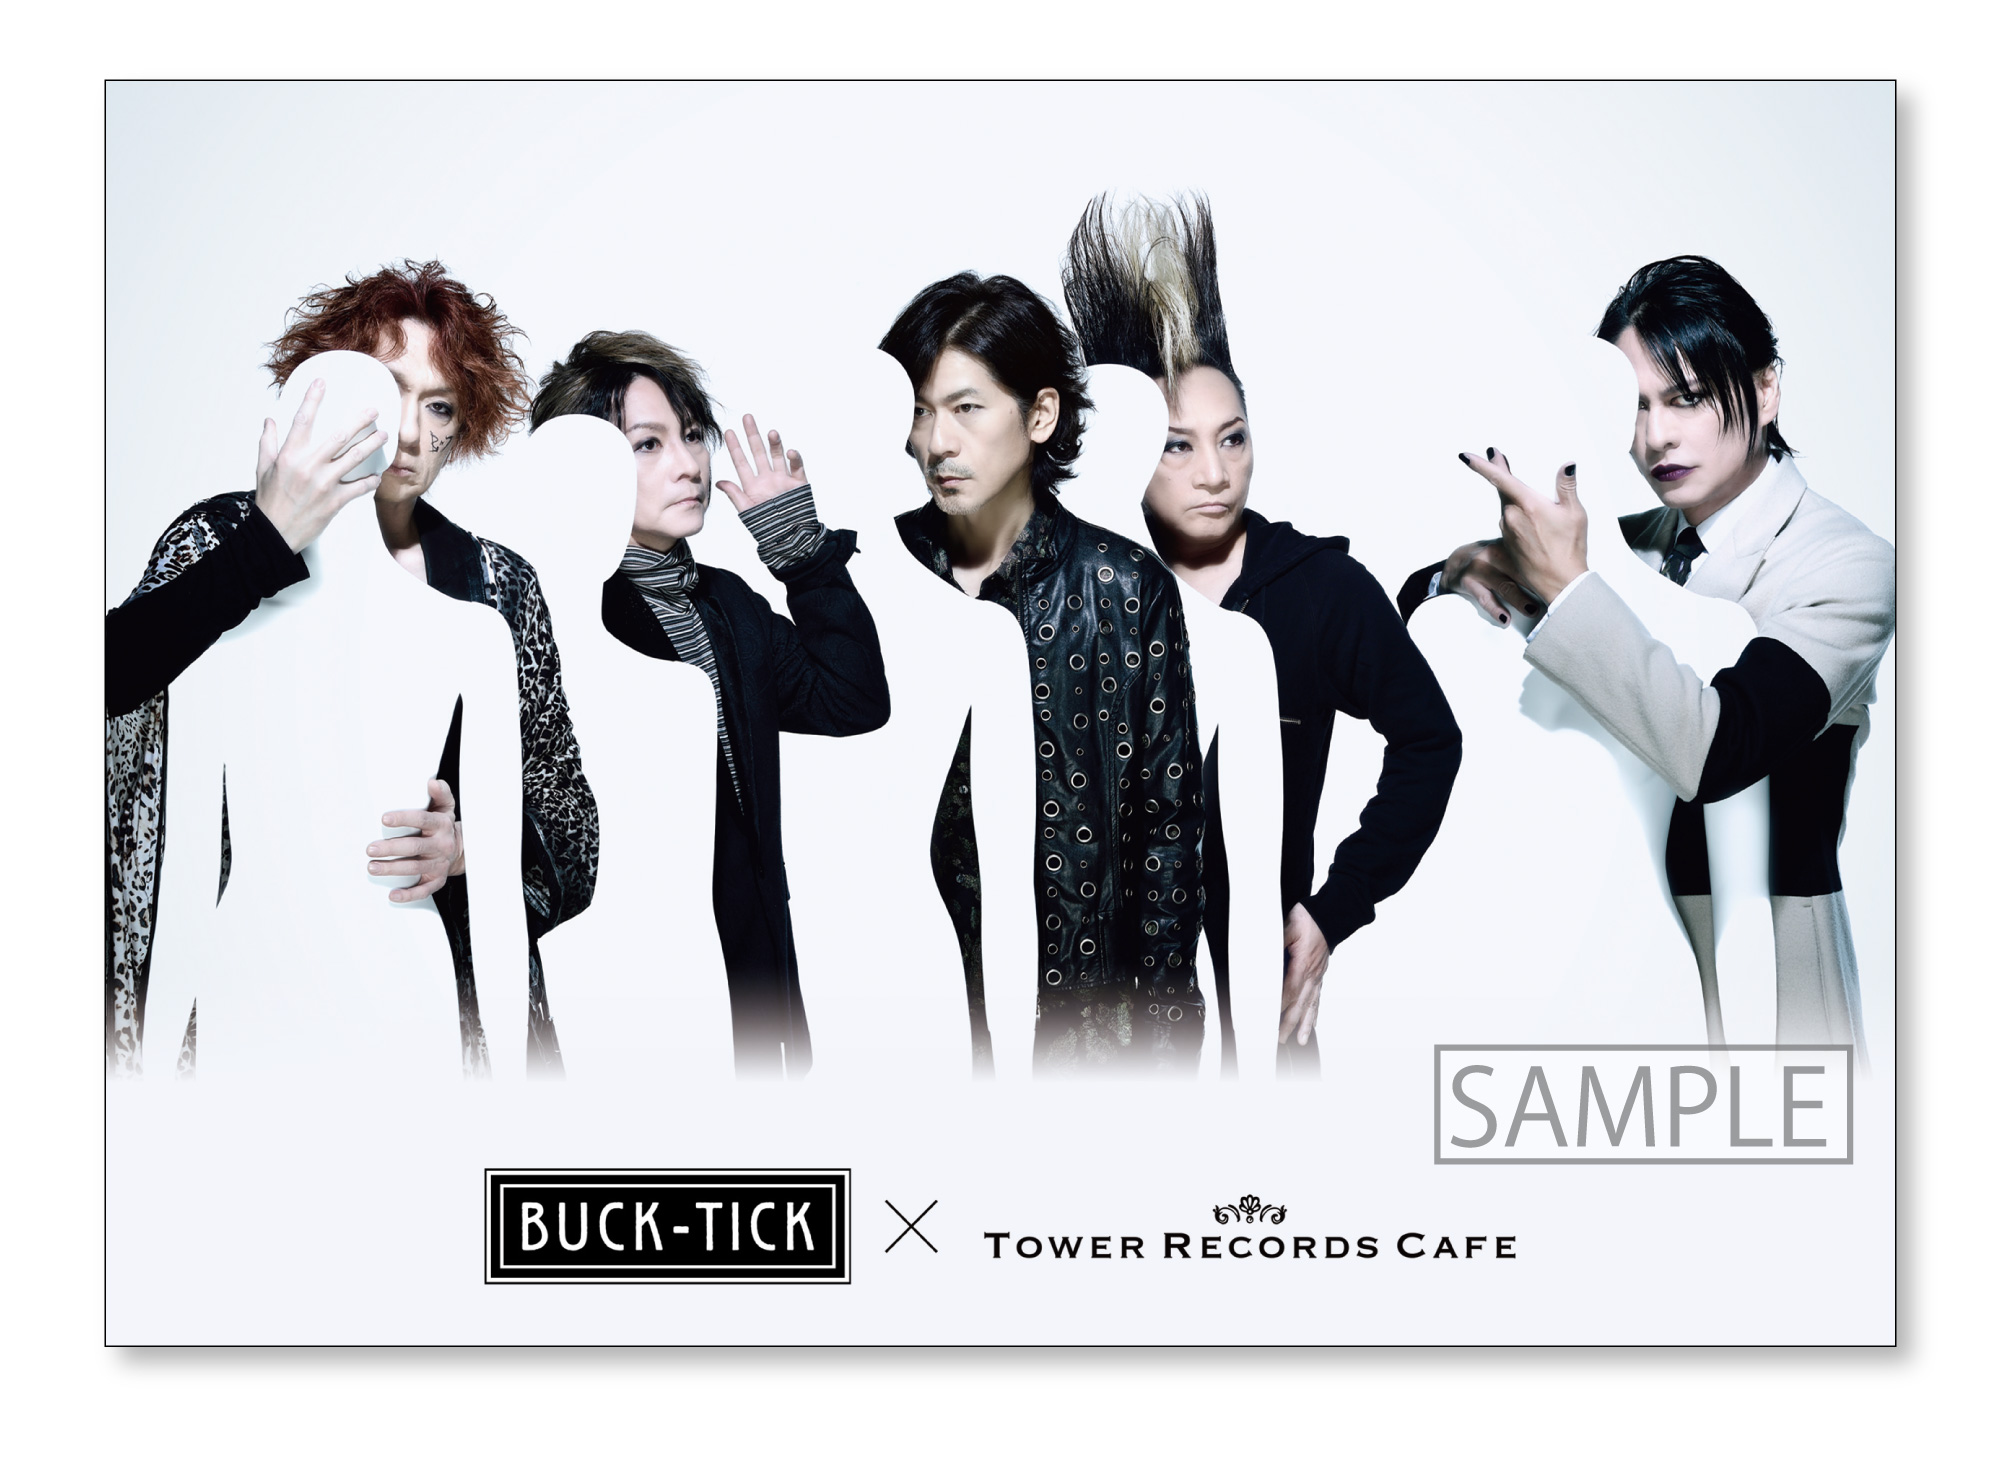 BUCK-TICK×TOWER RECORDS CAFE 2020年1月7日より開催決定！ - TOWER 